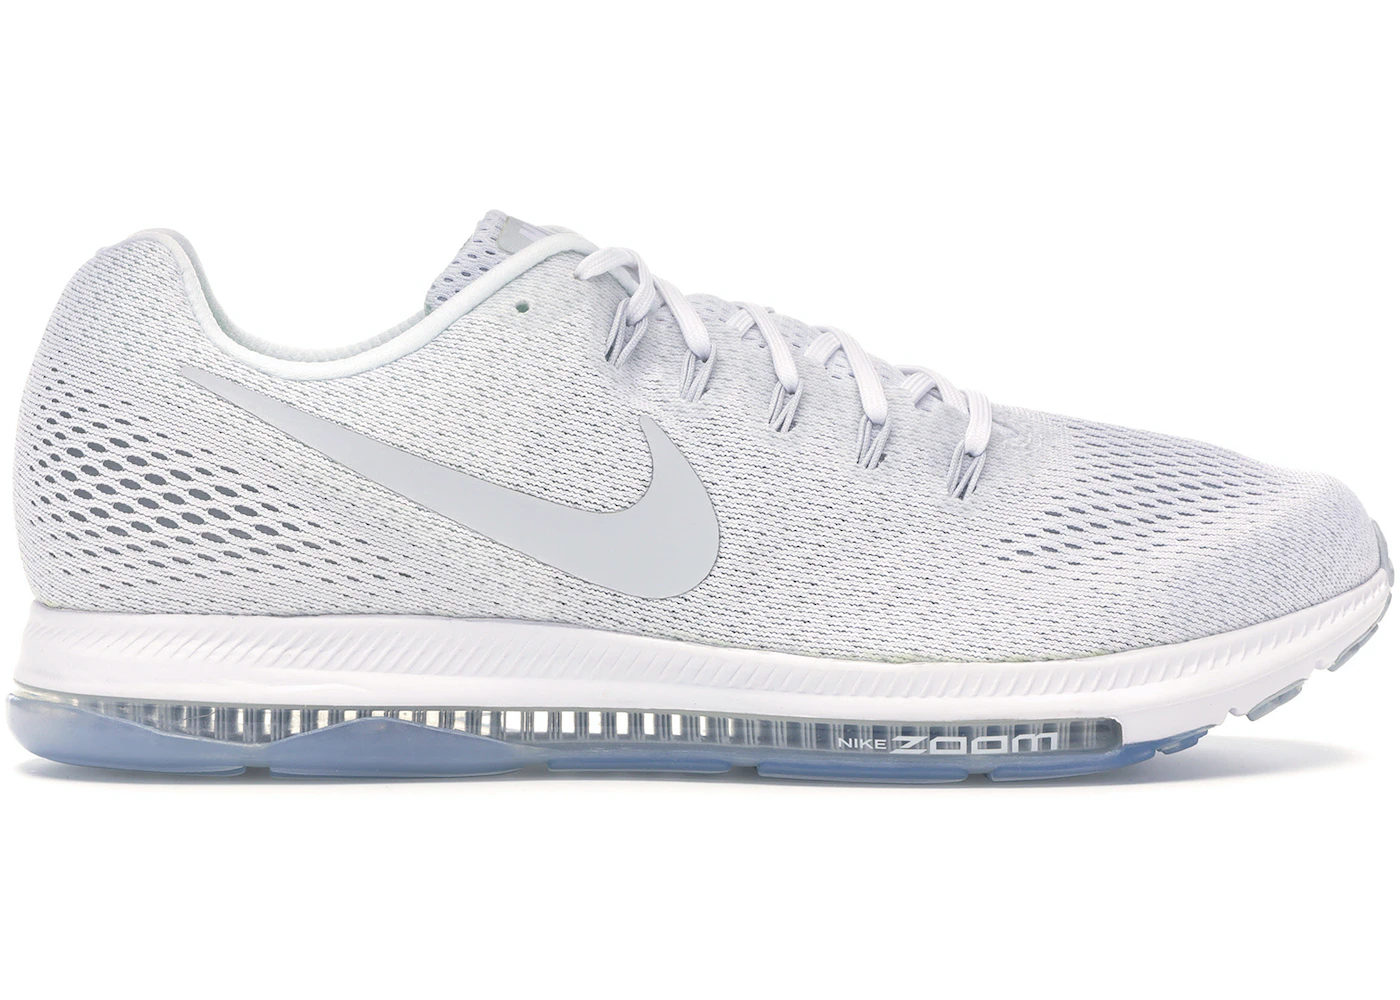 Nike Zoom All Low White/Pure Platinum Men's - 878670-101 - US